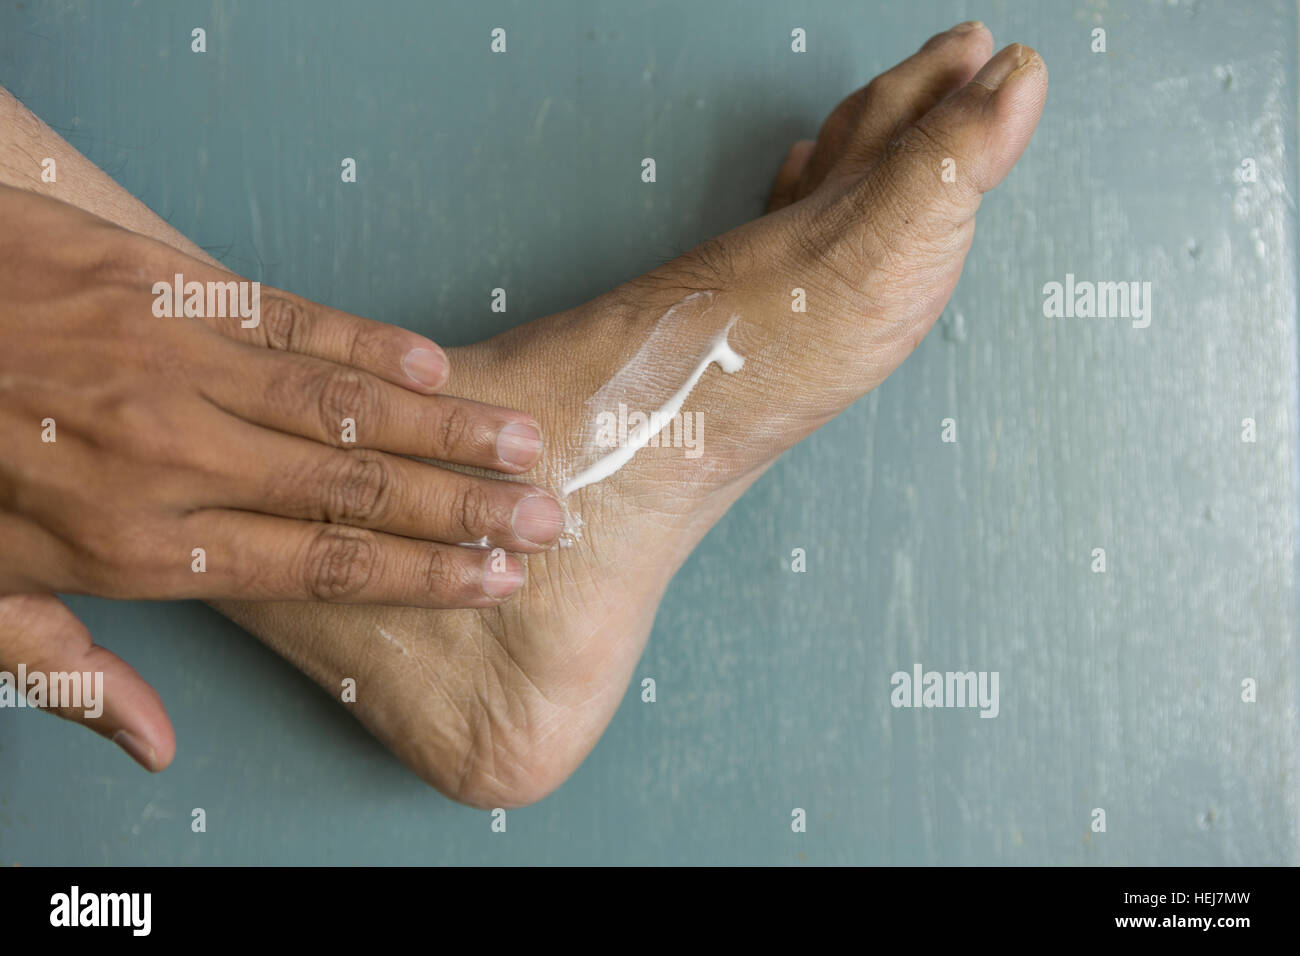 HYDERABAD, INDIA - DECEMBER 22,2016 Close-up of foot and hand of Asian male Adult of Indian origin applying lotion on dry skin Stock Photo